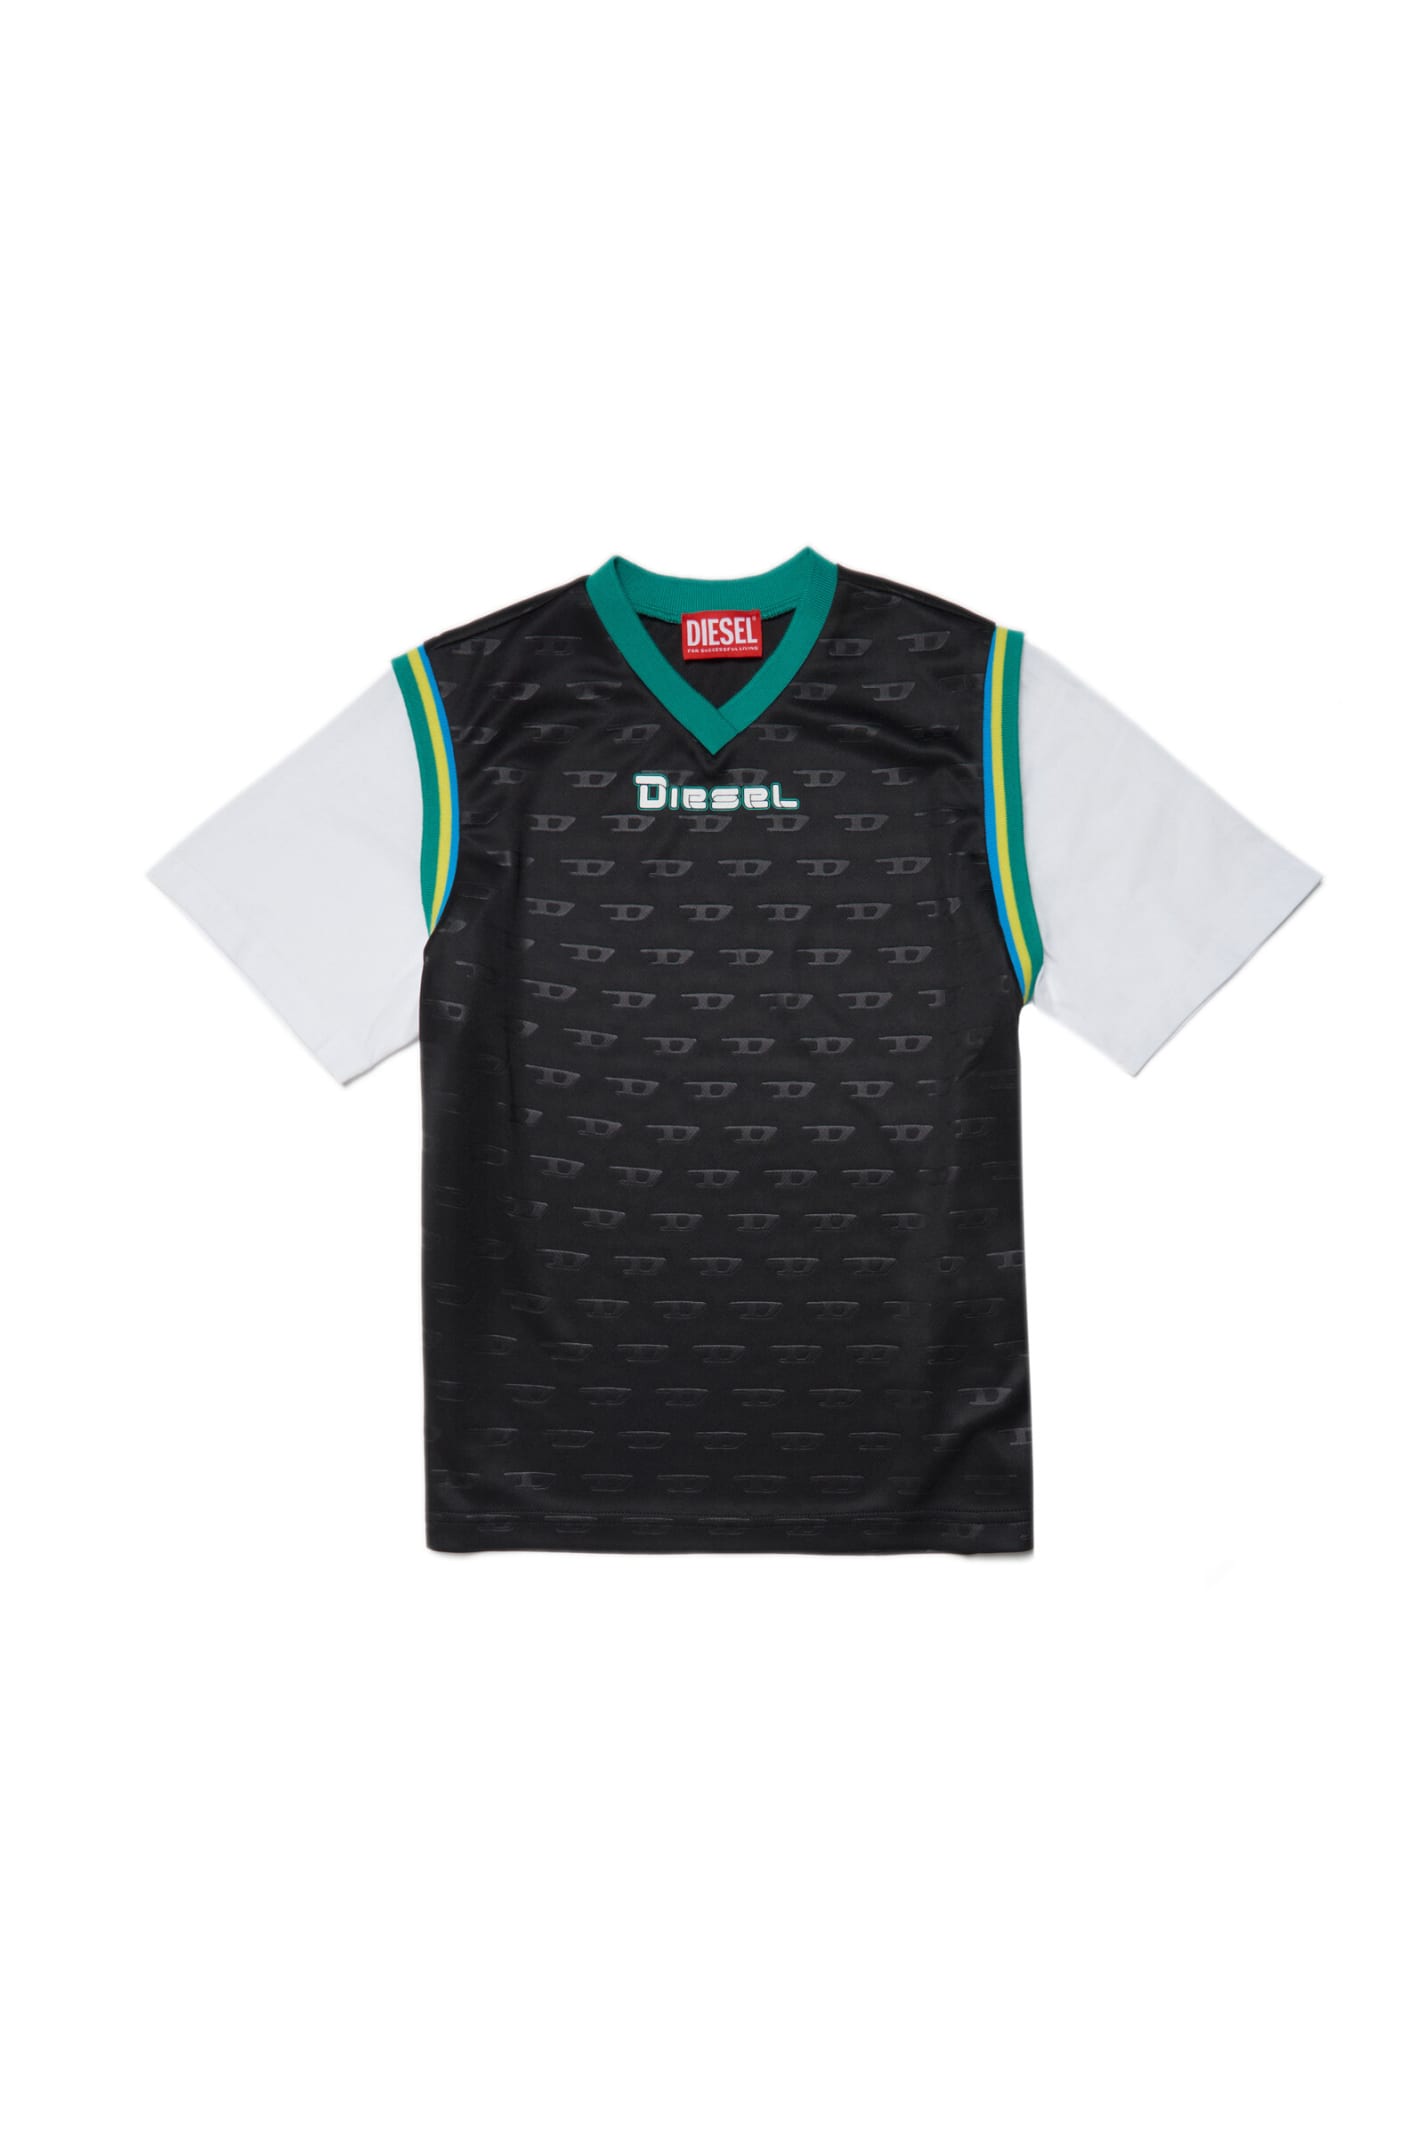 DIESEL TENNIX OVER T-SHIRT DIESEL BASKETBALL T-SHIRT IN TECHNICAL FABRIC WITH ALLOVER LOGO